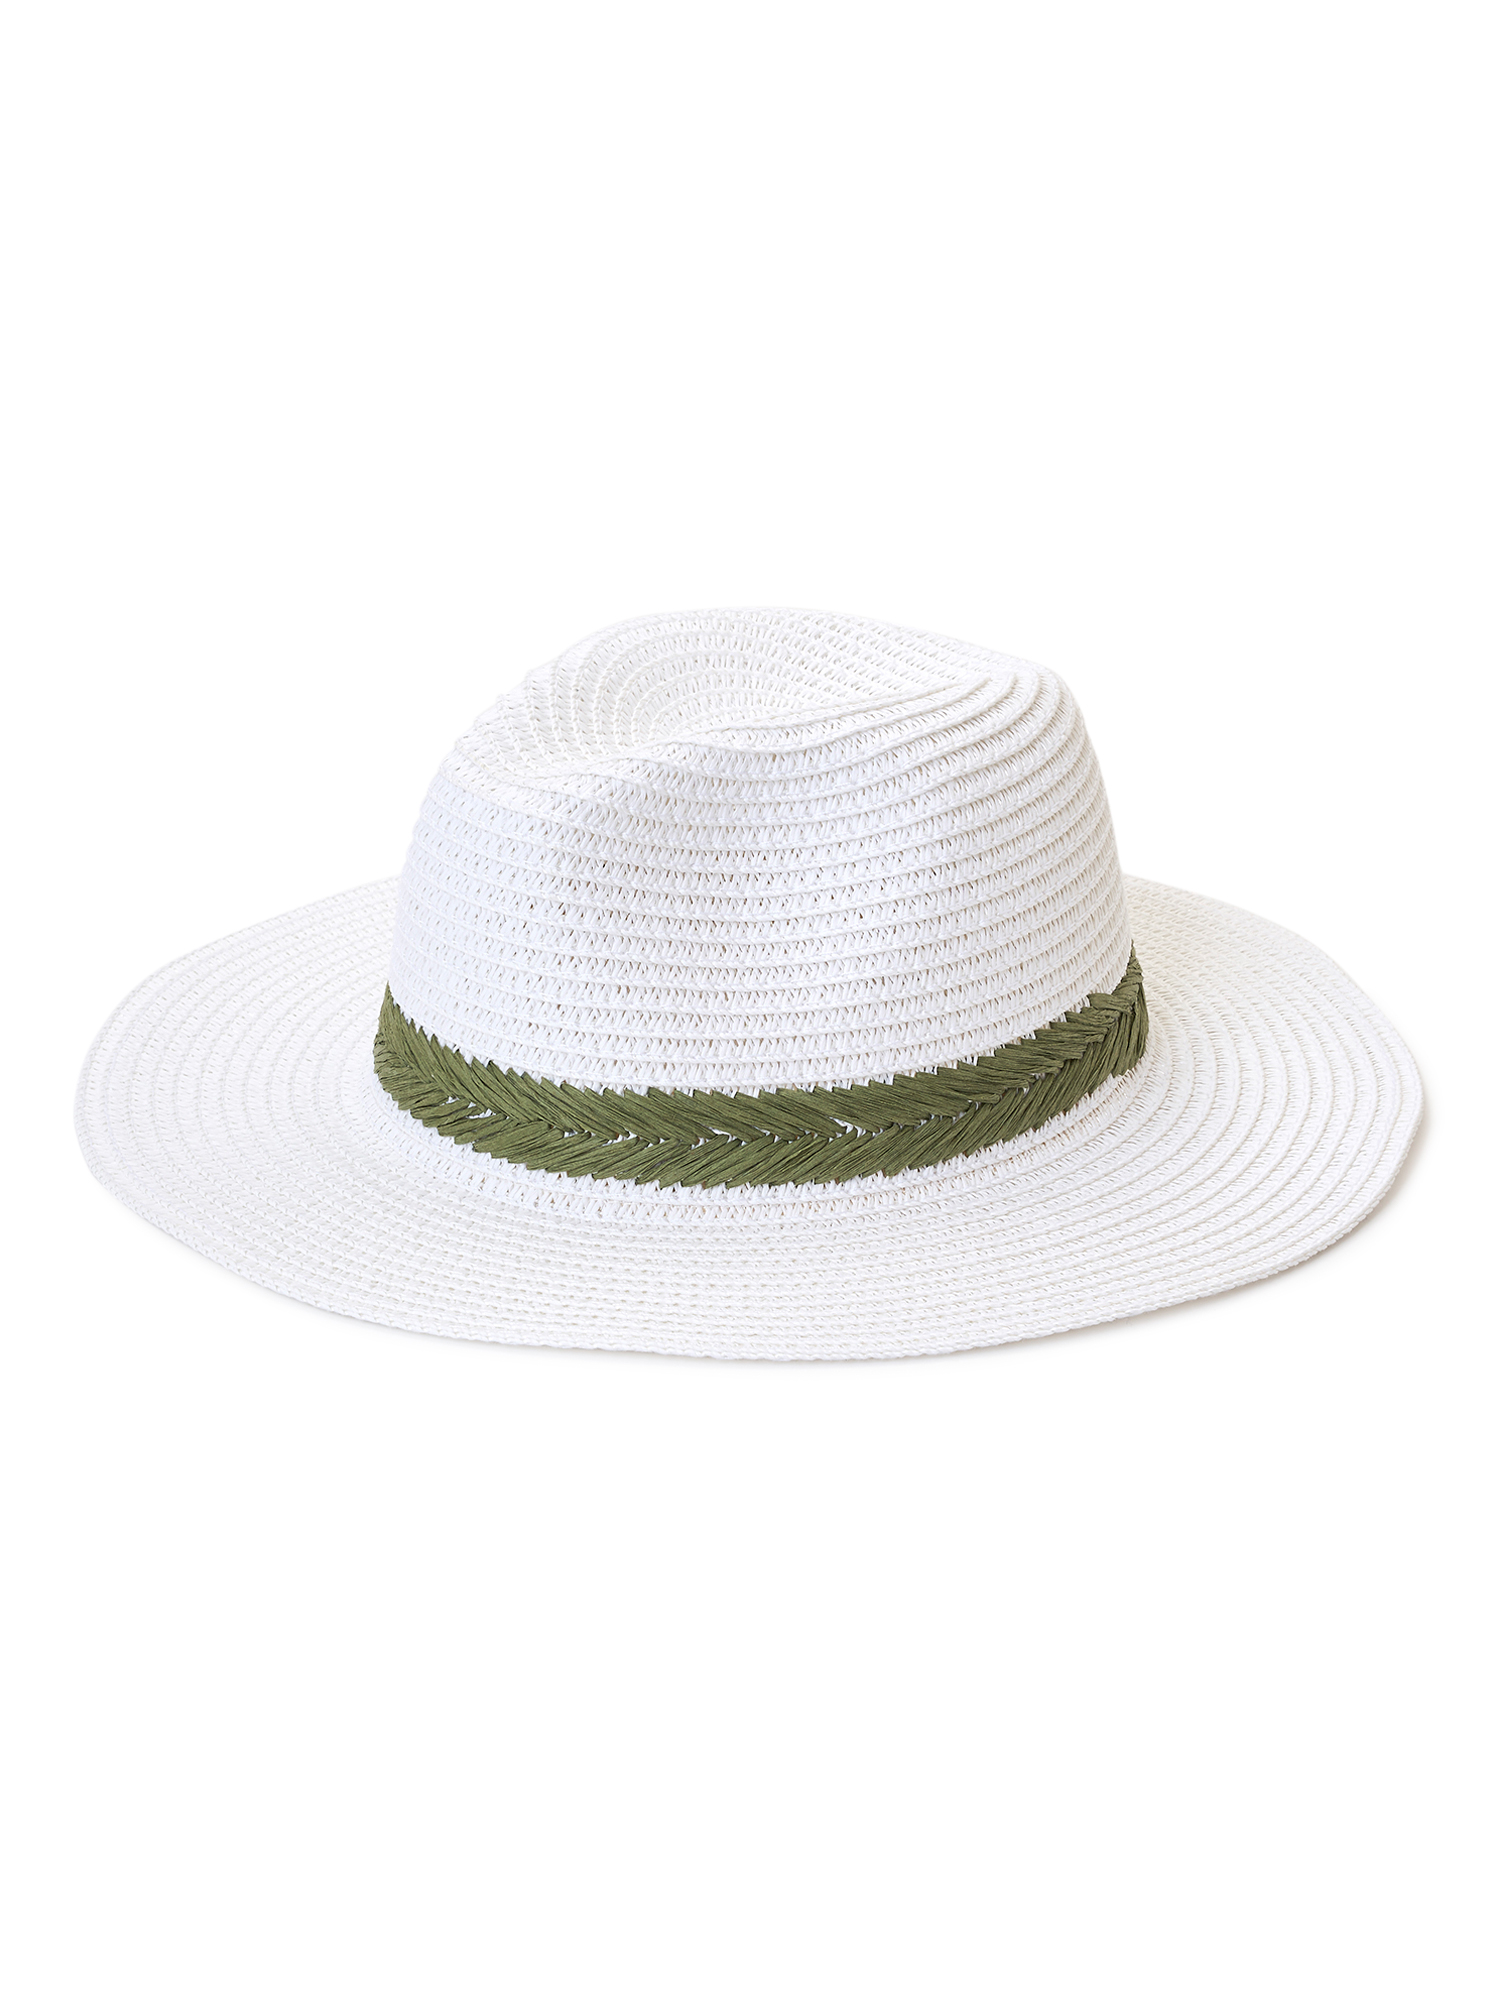 Time and Tru Women's Embroidered Fedora Hat - image 1 of 4